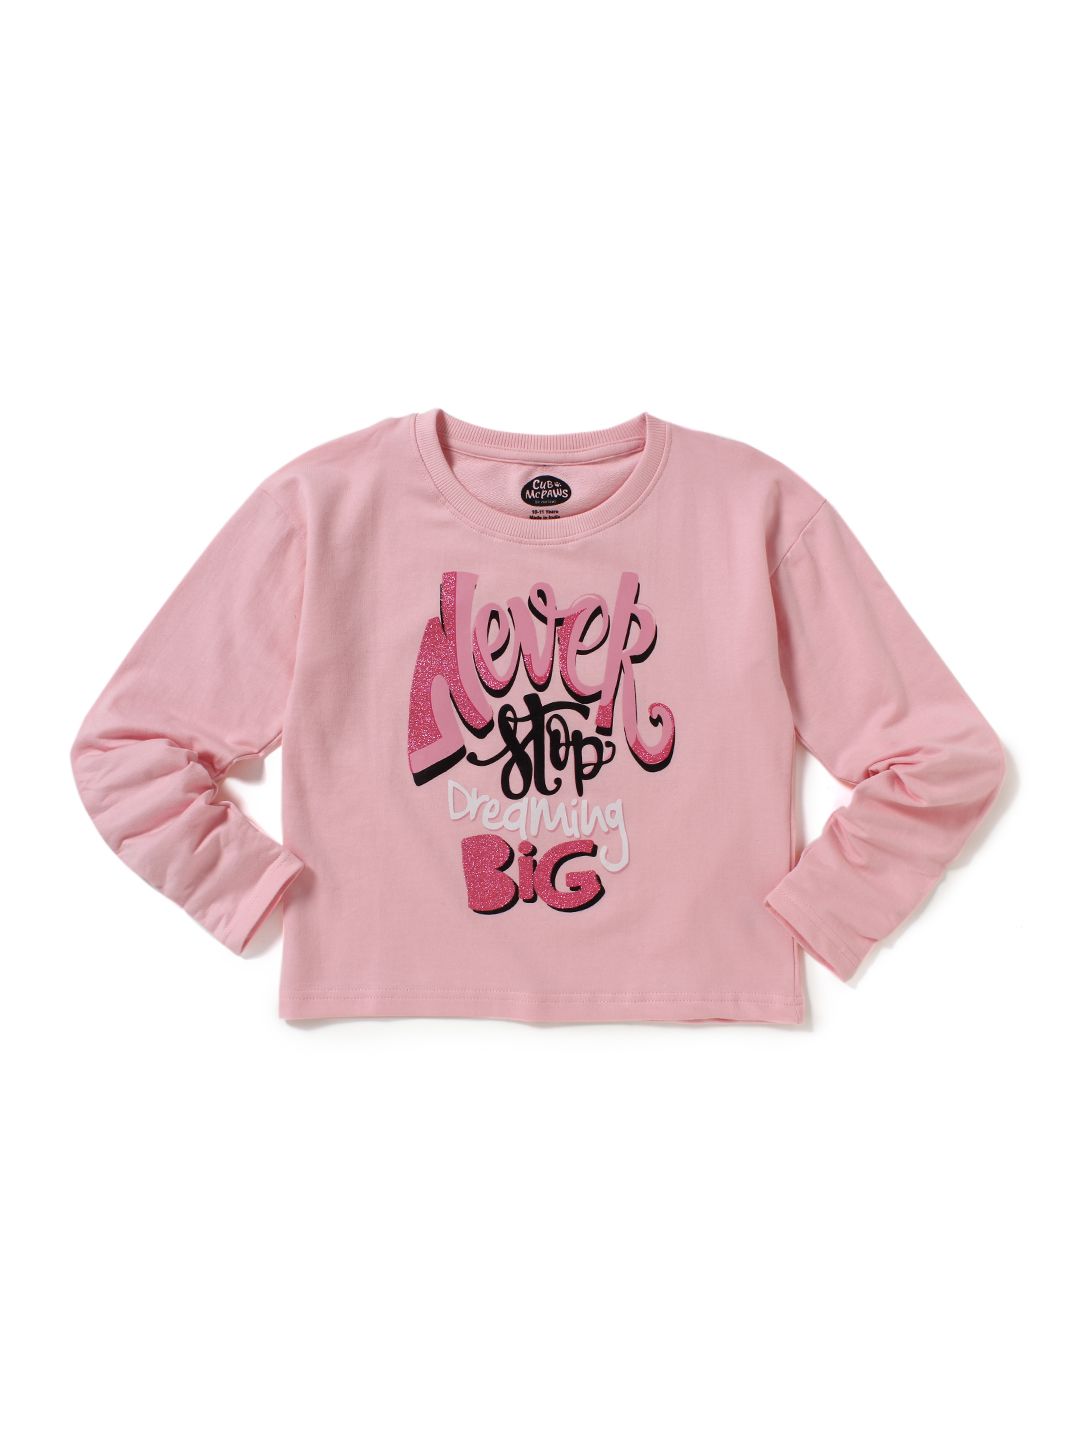 Girls Pink Crop Top with Glitter Print